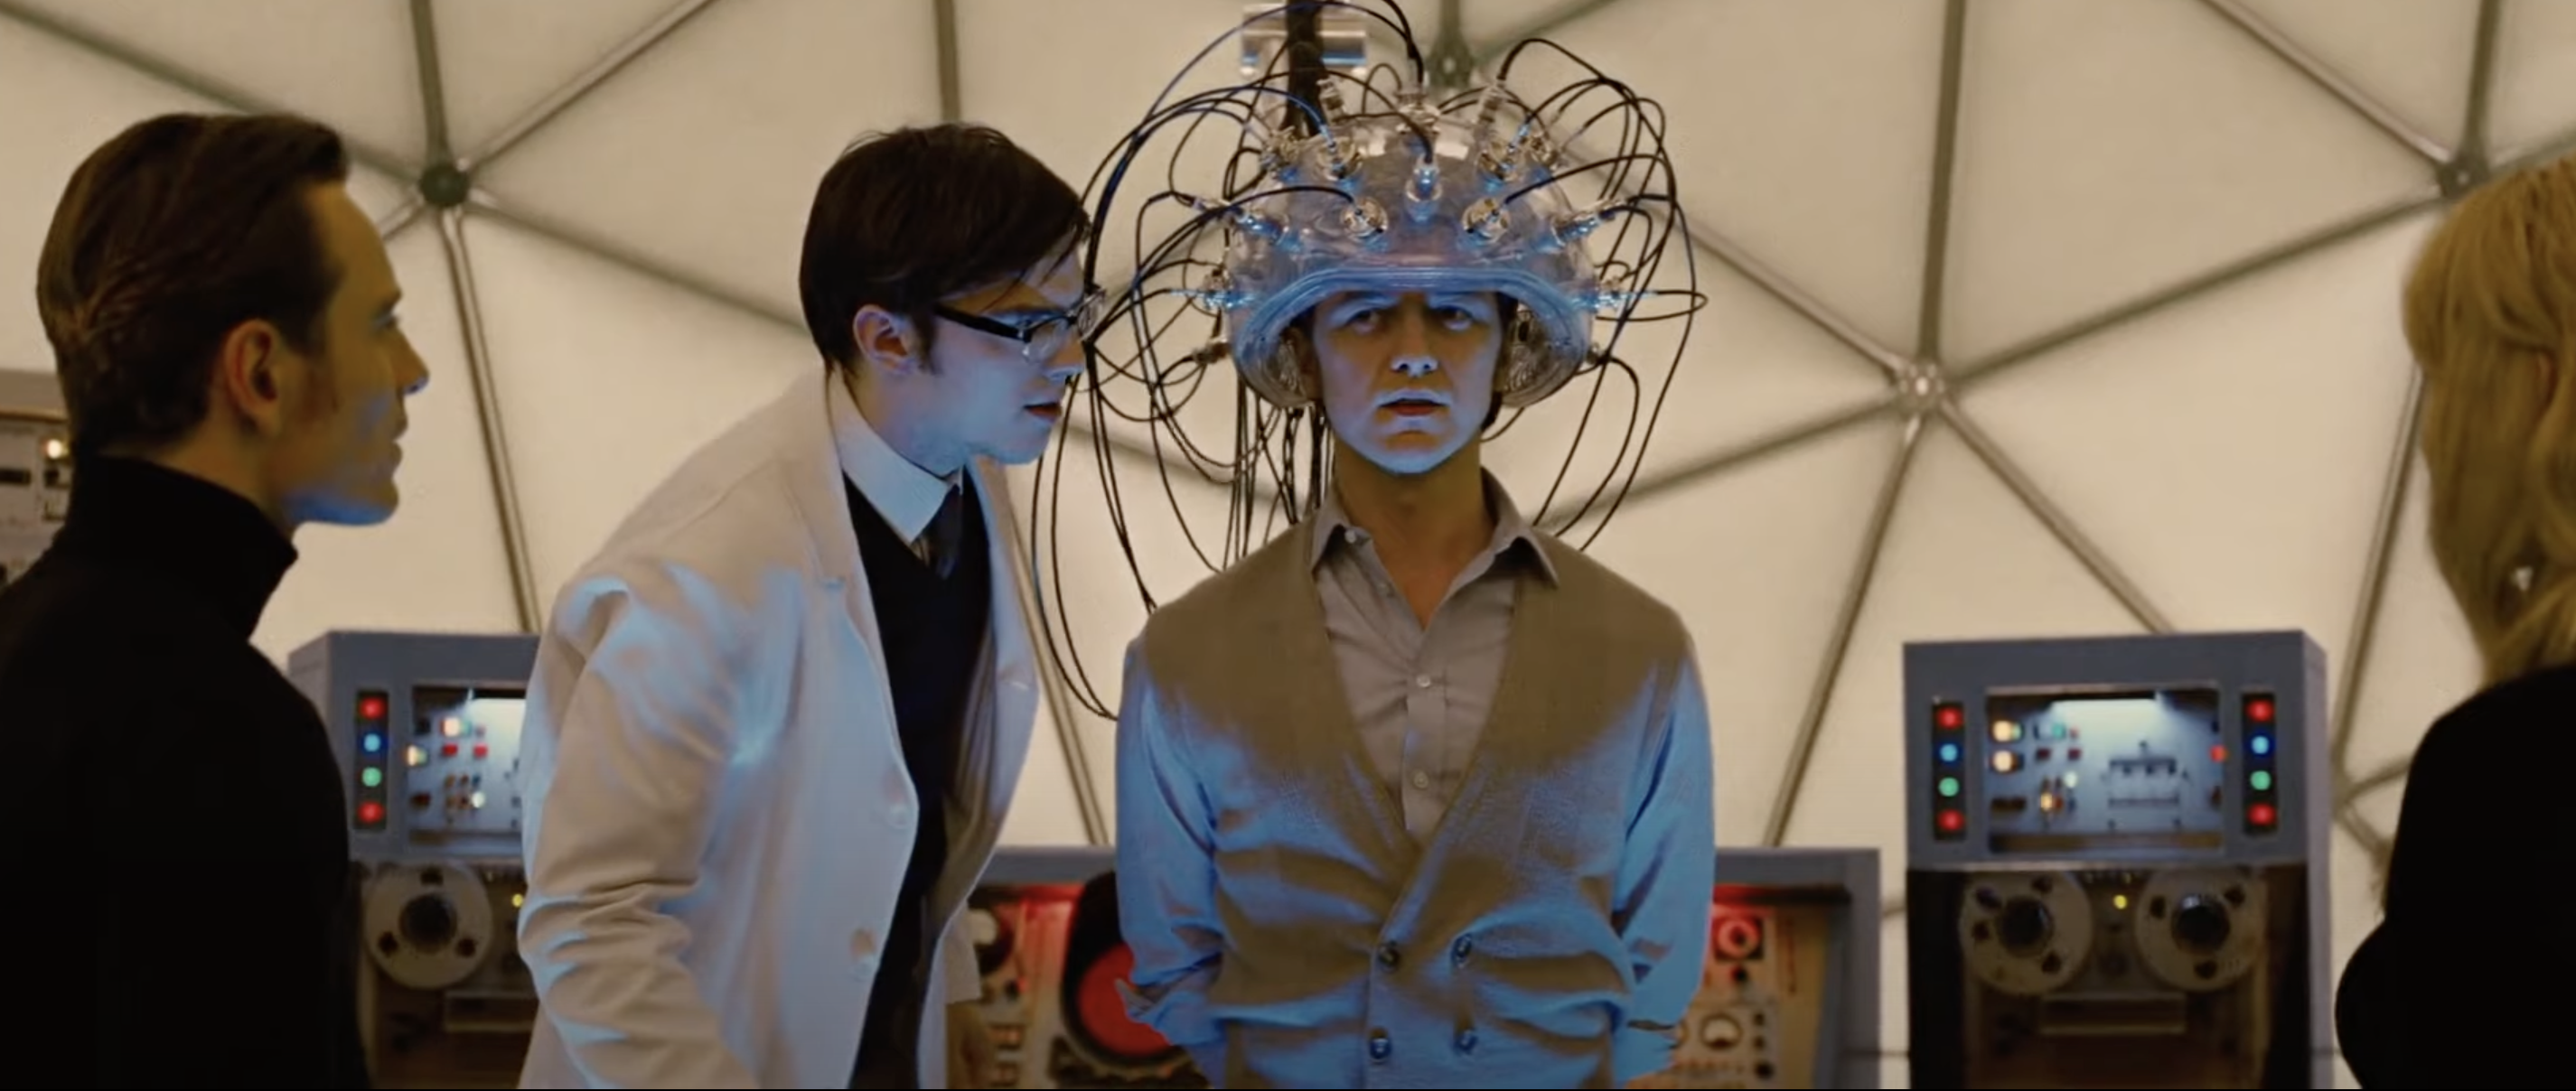 X-Men
Cerebro amplifies the brainwaves of the user. In the case of telepaths, it enables the user to detect traces of others worldwide, also able to distinguish between humans and mutants. Depictions of its inherent strength have been inconsistent; at times in the storylines it could detect mutated aliens outside of the planet, when at others it could only scan for mutants' signatures in the United States. It is not clear whether it finds mutants by the power signature they send out when they use their powers or by the presence of the X-gene in their body; both methods have been used throughout the comics.
Using Cerebro can be extremely dangerous, and telepaths without well-trained, disciplined minds put themselves at great risk when attempting to use it. This is due to the psychic feedback that users experience when operating Cerebro. As the device greatly enhances natural psychic ability, users who are unprepared for the sheer enormity of this increased psychic input can be quickly and easily overwhelmed, resulting in insanity, coma, permanent brain damage or even death. The one exception has been Magneto, who has been said to have minor or latent telepathic abilities as well as experience amplifying his mental powers with mechanical devices of his own design. Some mutants have learned to shield themselves from Cerebro, usually via their own telepathic ability. Magneto can shield himself from the device through use of minimal telepathic powers; in the film series, he does so with a specially constructed helmet. Originally, Cerebro was a device similar to a computer that was built into a desk in Xavier's office. This early version of Cerebro operated on punched cards, and did not require a user (telepathic or otherwise) to interface with it. A prototype version of Cerebro named Cyberno was used by Xavier to track down Cyclops in the "Origins of the X-Men" back-up story in X-Men Volume 1 #40. In the first published appearance of Cerebro, X-Men Volume 1 #7, Professor X left the X-Men on a secret mission (to find Lucifer) and left Cerebro to the new team leader, Cyclops, who used it to keep track of known evil mutants and to find new evil mutants. The device also warned the X-Men of the impending threat posed by the non-mutant Juggernaut prior to that character's first appearance. Later, the device was upgraded to the larger and more familiar telepathy-based technology with its interface helmet. More recently, following the example set by the X-Men films, Cerebro has been replaced by Cerebra (referred to as Cerebro's big sister), a machine the size of a small room in the basement of Xavier's School For Higher Learning. Though designed to resemble the movie version of Cerebro, Cerebra is much smaller than the films' version. It resembles a pod filled with a sparkling fog that condenses into representations of mental images.